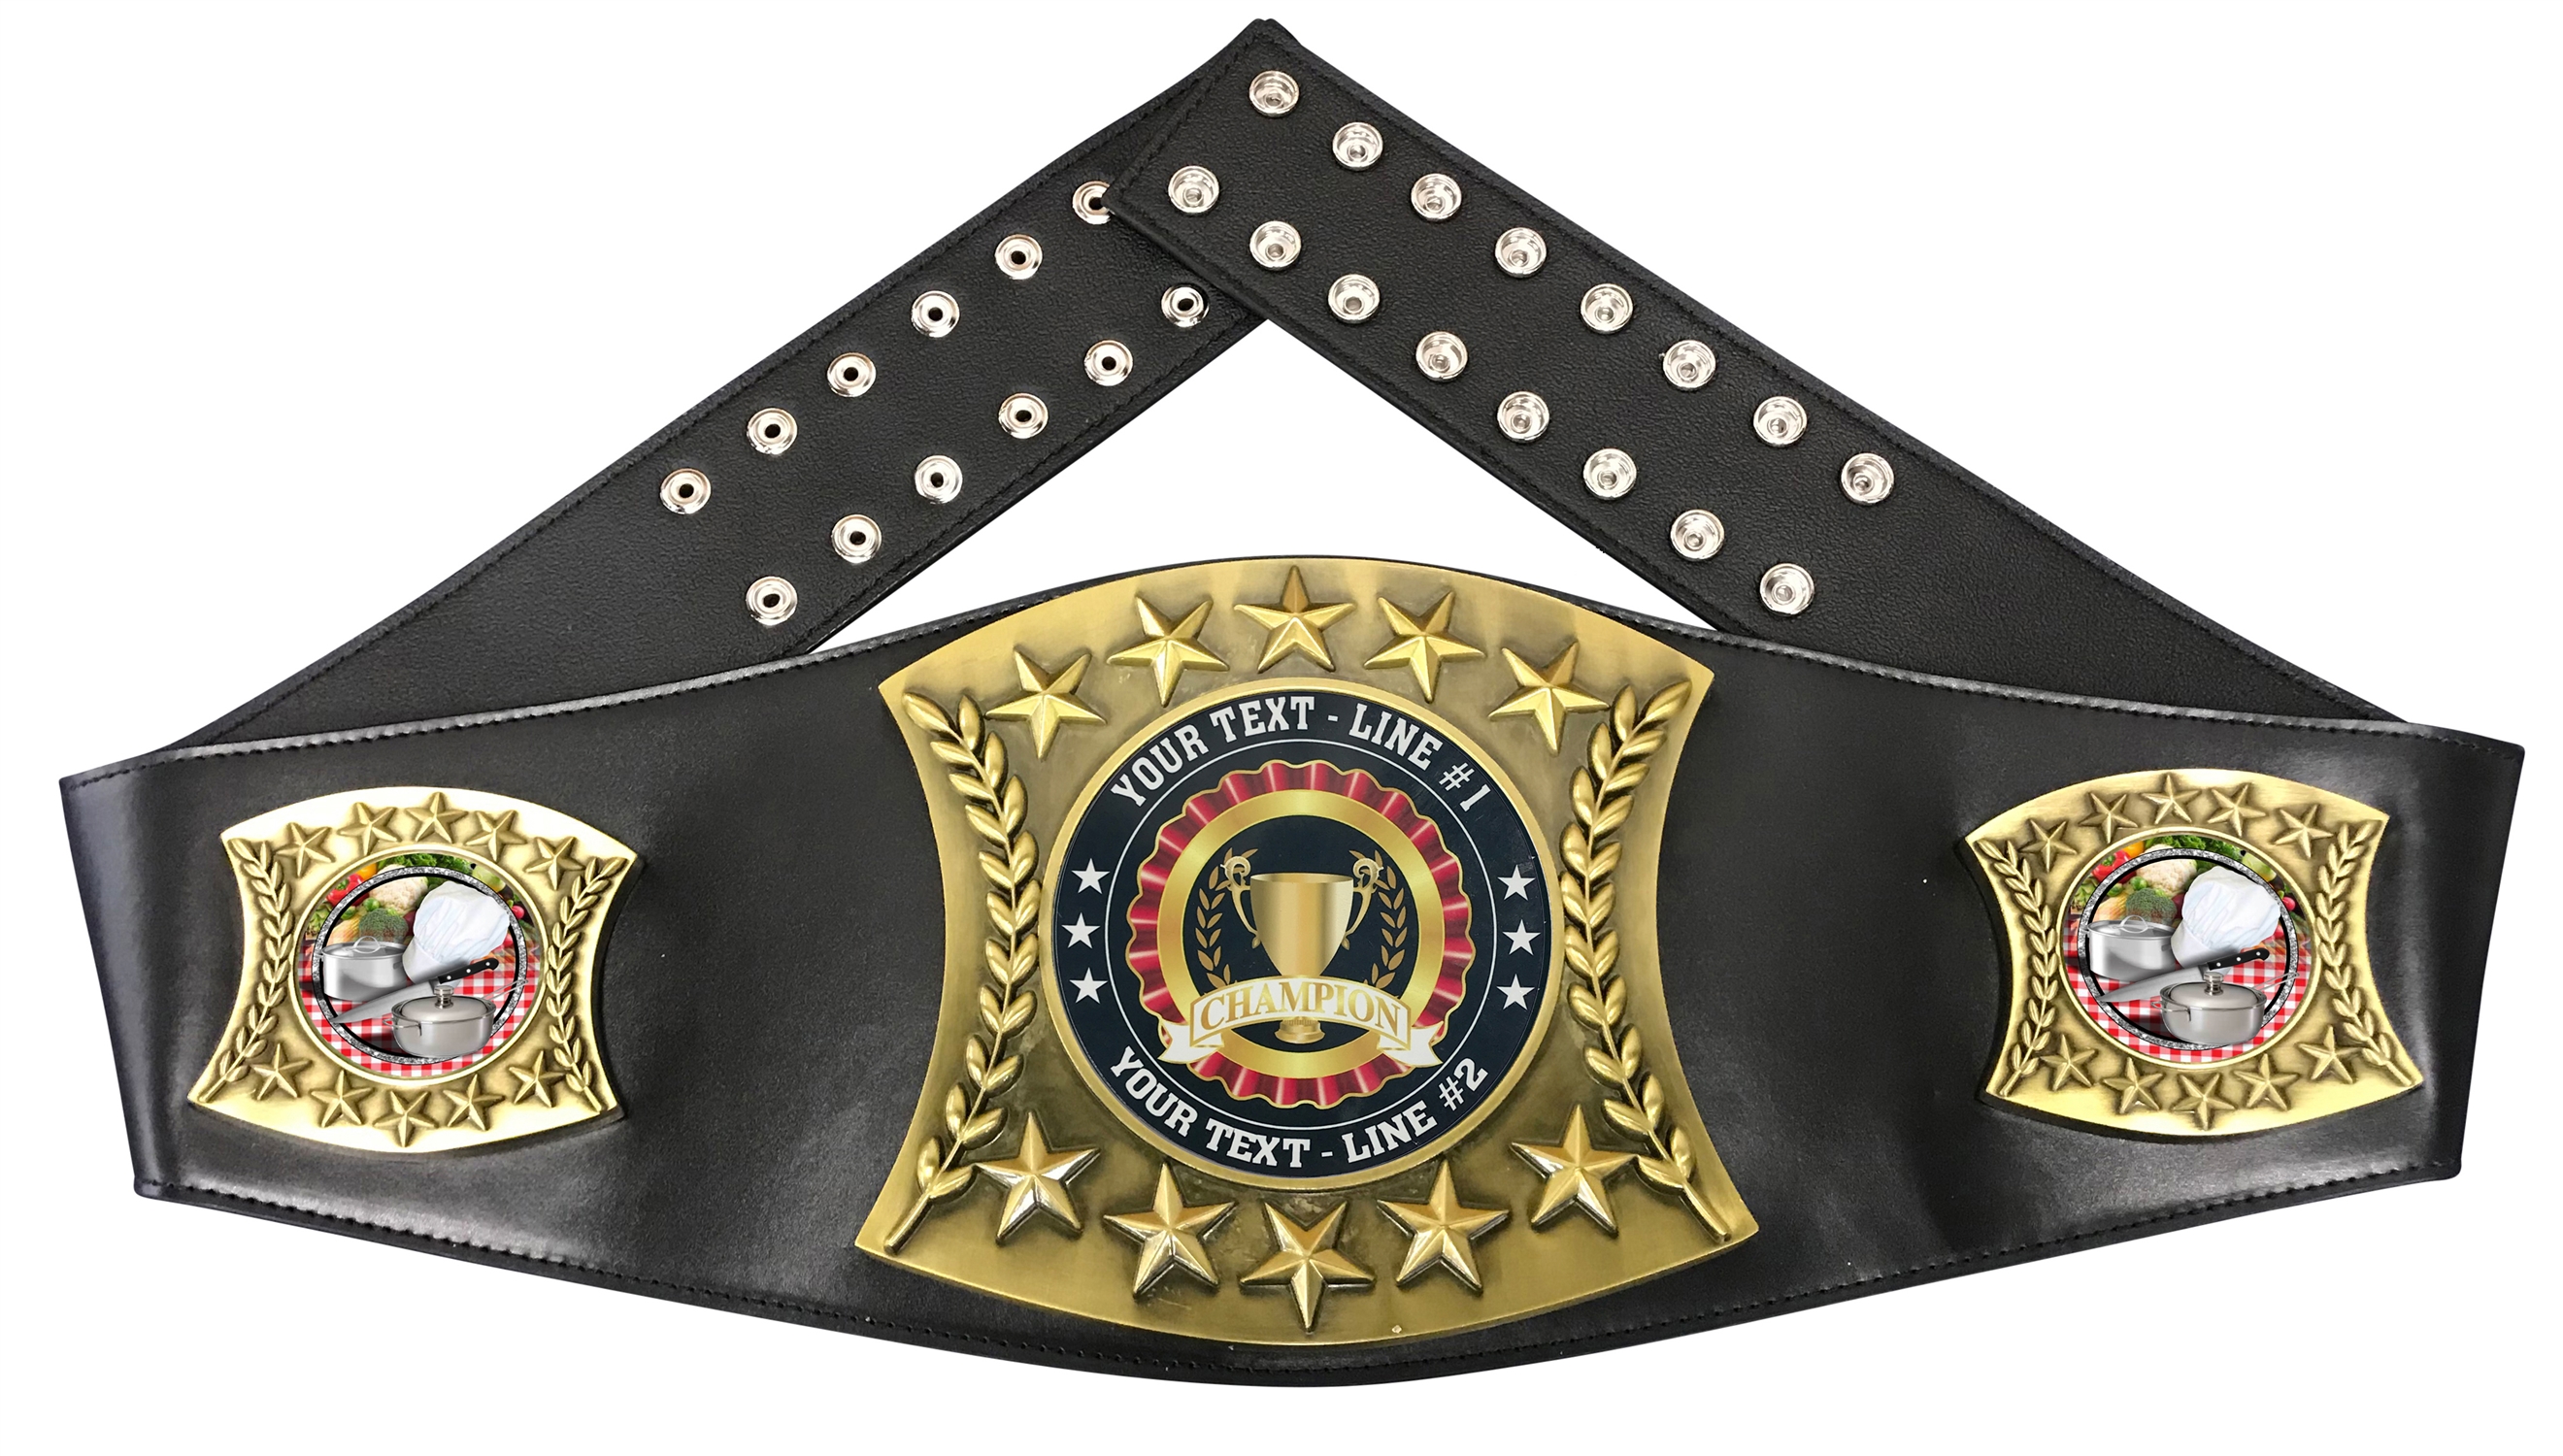 Chef Cooking Personalized Championship Belt